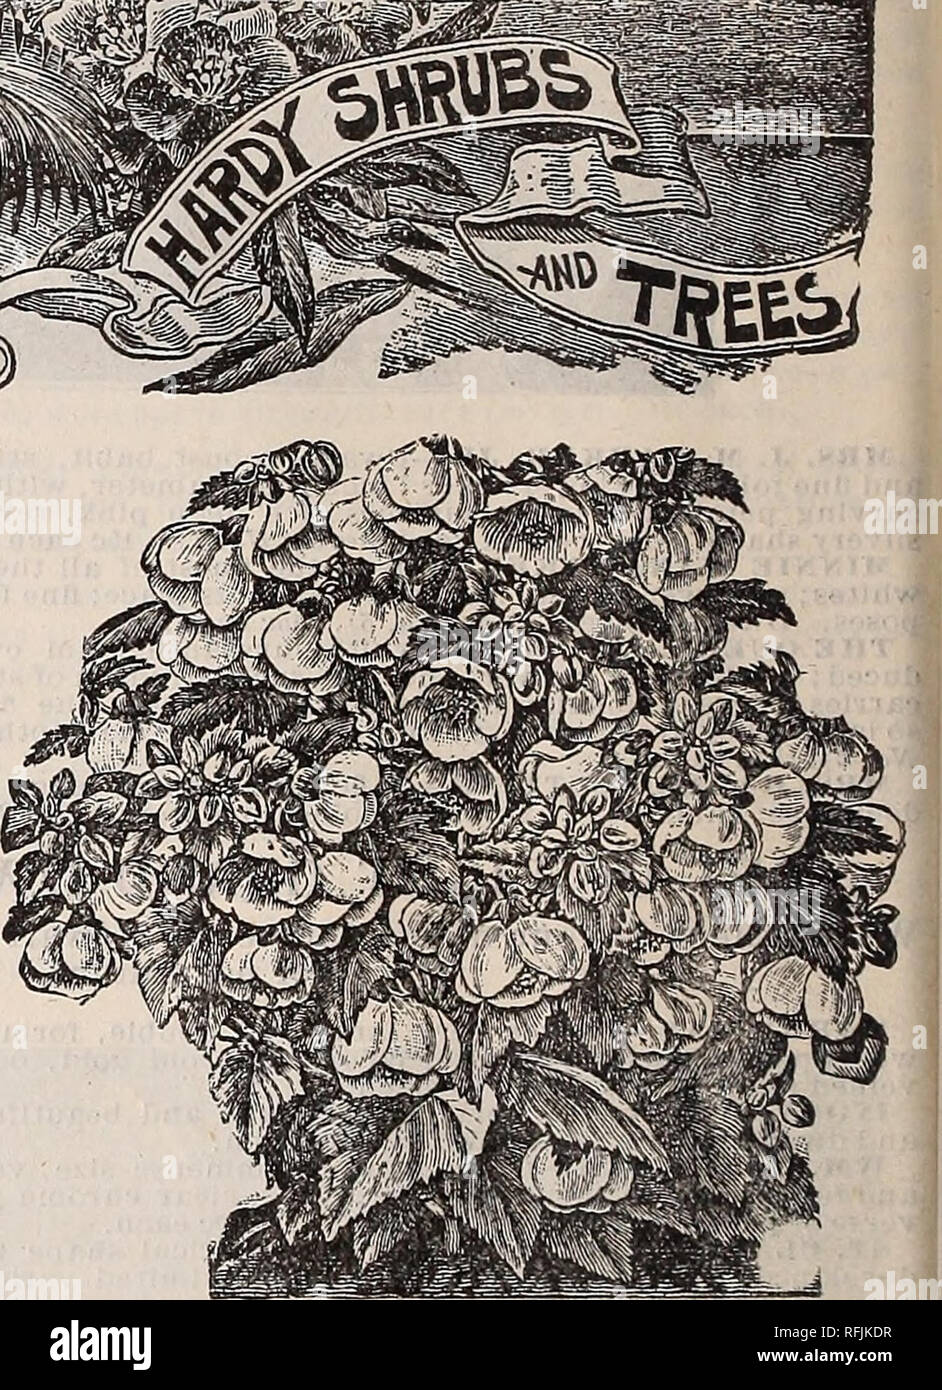 . Spring catalogue : 1899. Nurseries (Horticulture) Missouri Saint Louis Catalogs; Bulbs (Plants) Catalogs; Flowers Catalogs; Vegetables Seeds Catalogs; Plants, Ornamental Catalogs; Fruit Catalogs. New Abuiilun—Uuiueu i&gt;tim. CLERODENDRON FRAGRANS. (Fragrant Clerodendron.) This new plant is a native of China, and is most desirable In every way. Illustration gives an excellent idea of Its great beauty. The exquisite waxy white flowers are produced In wonderful profusion In dense, compact clus- ters, and their fragrance is simply delicious; fully as sweet as a Gardenia or Jessamine. It Is a dw Stock Photo